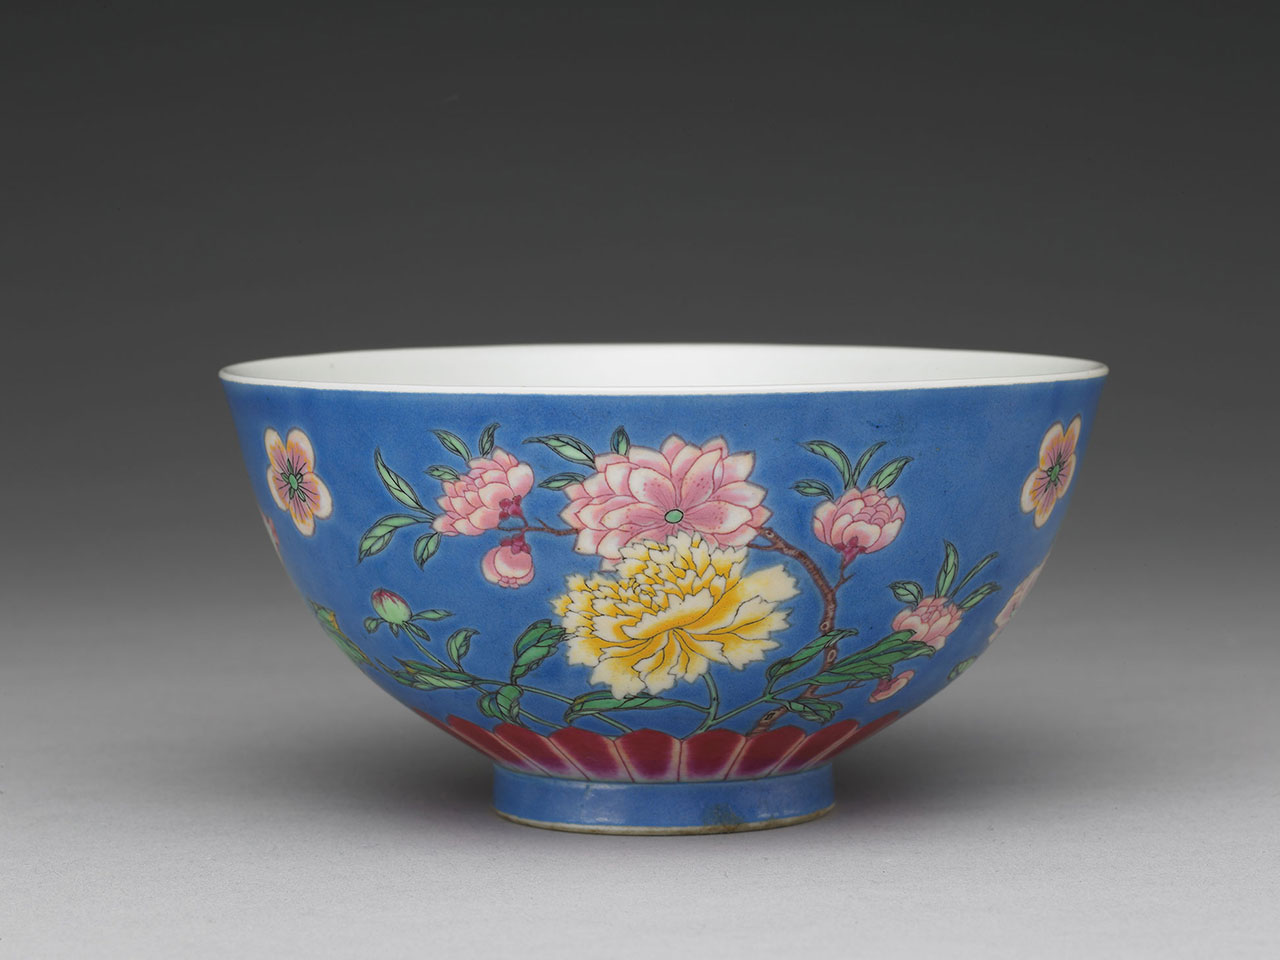 Bowl with flowers of the four seasons on a blue ground in painted enamels